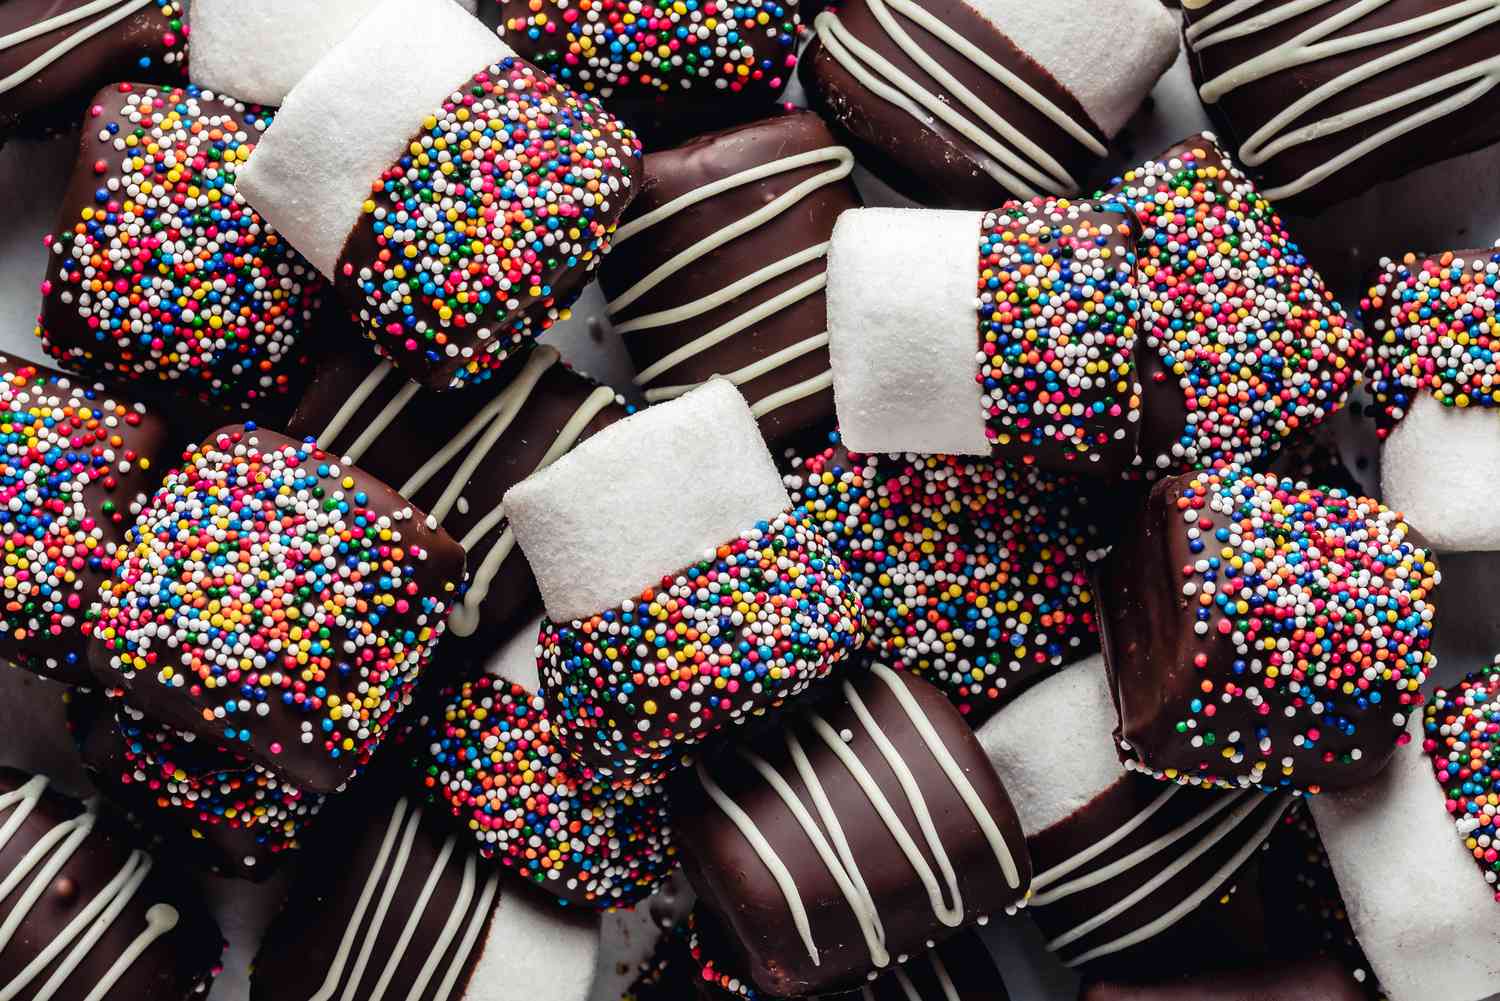 How To Store Chocolate Dipped Marshmallows